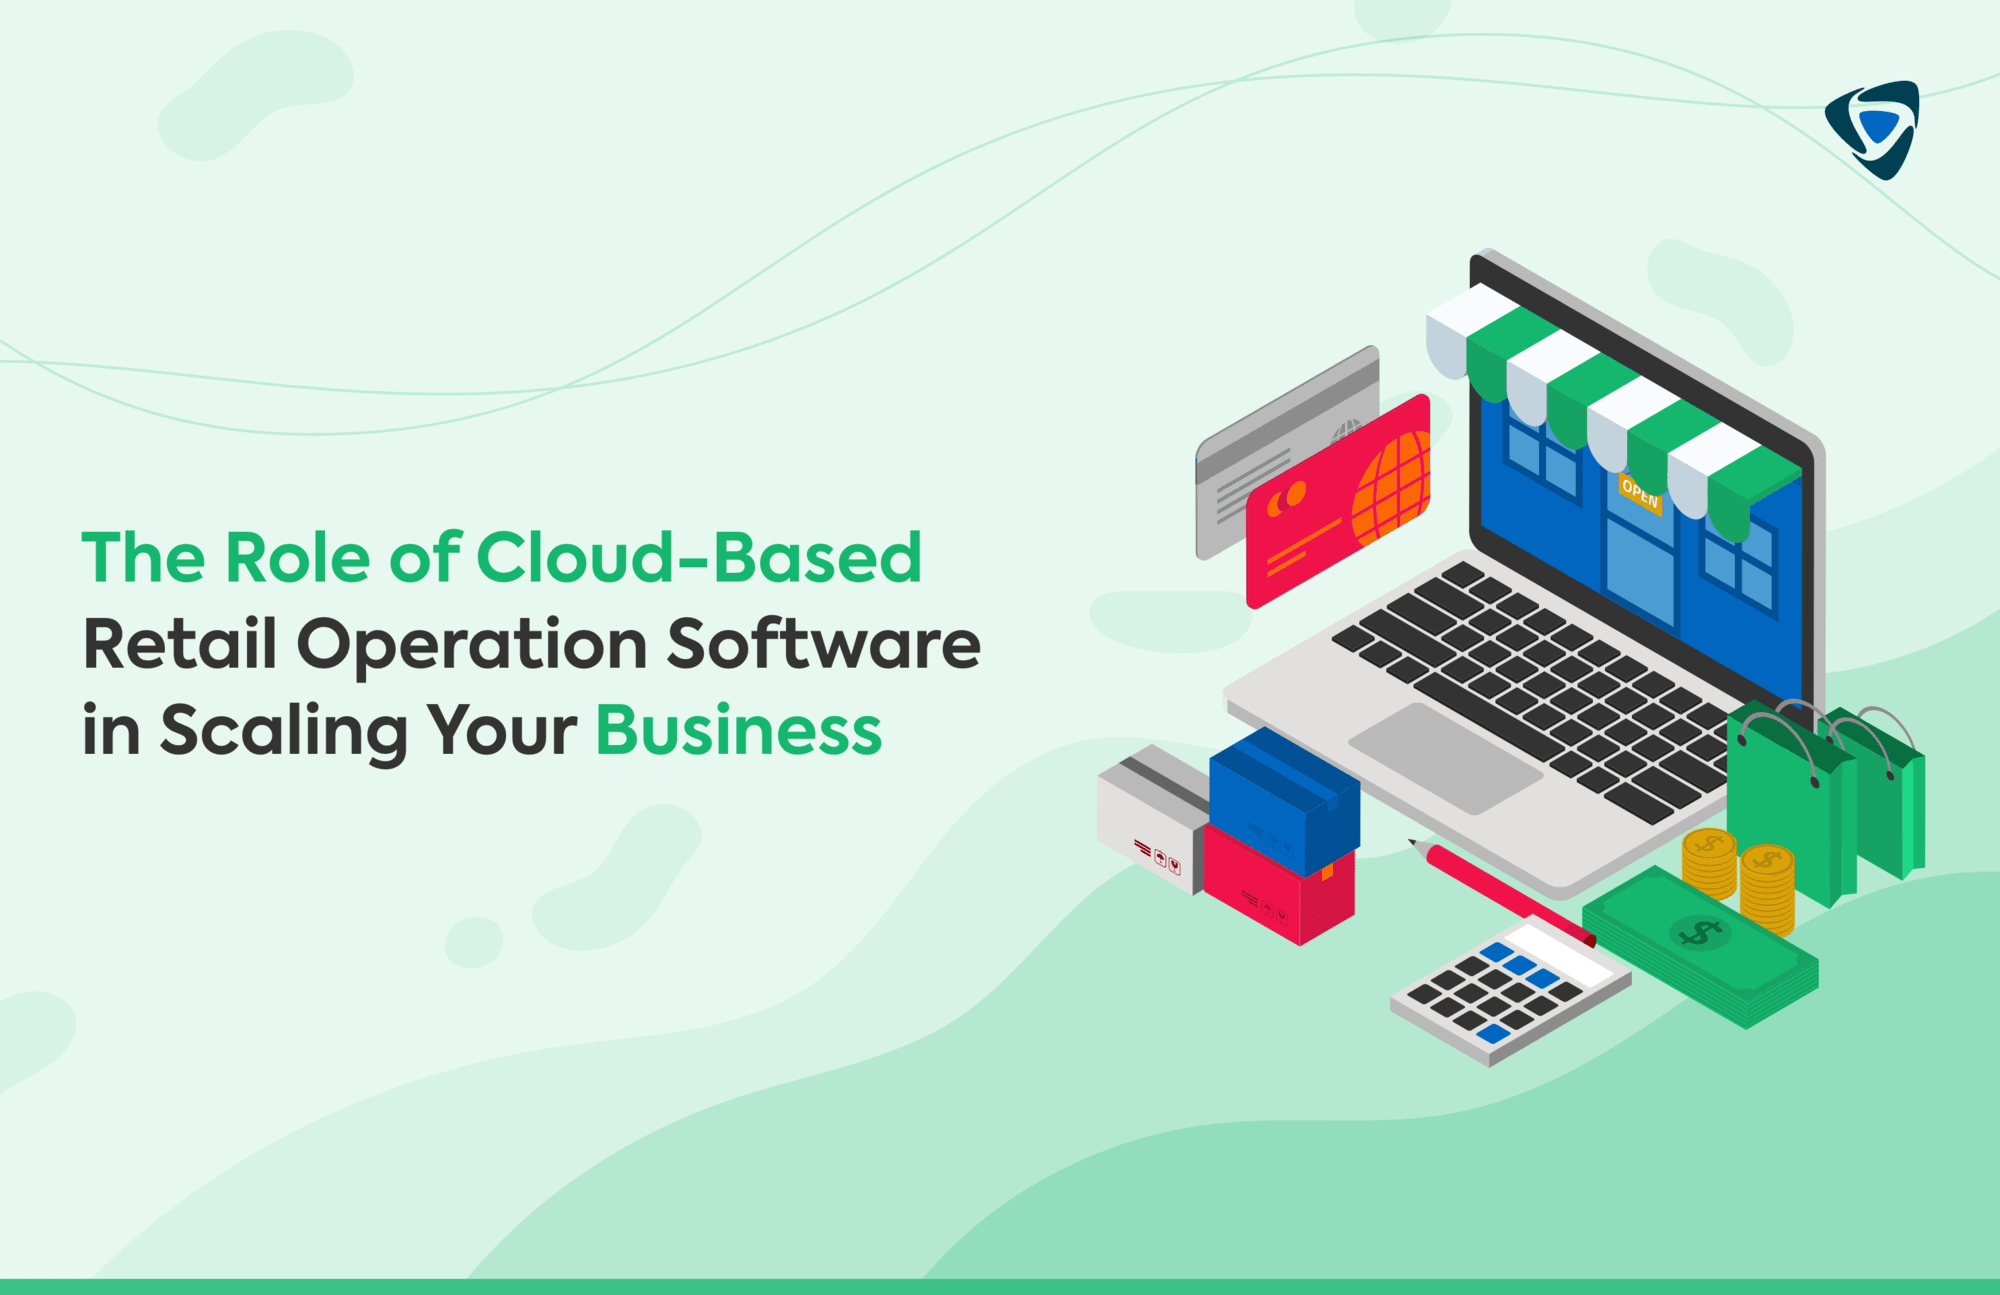 The Role of Cloud-Based Retail Operation Software in Scaling Your Business